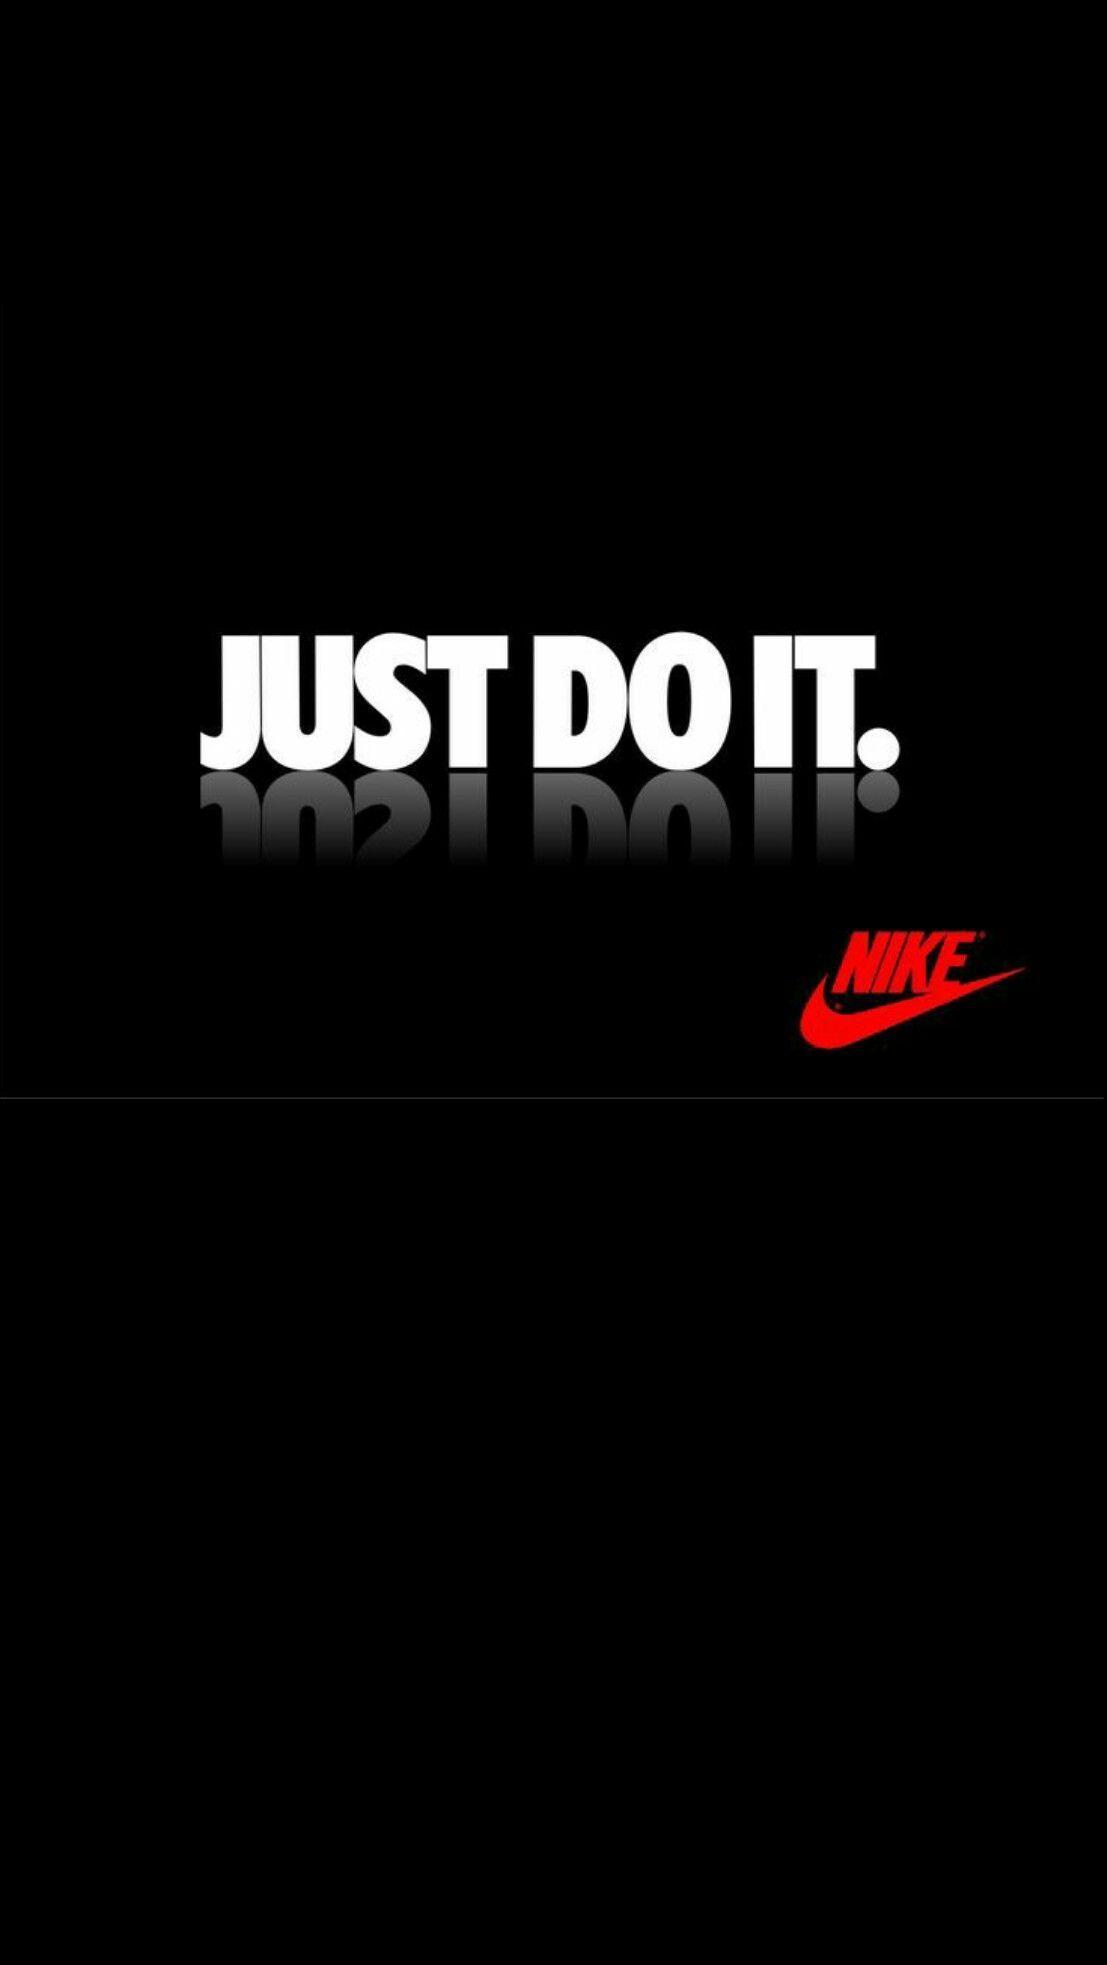 Nike Black Iphone Wallpapers Top Free Nike Black Iphone Backgrounds Wallpaperaccess